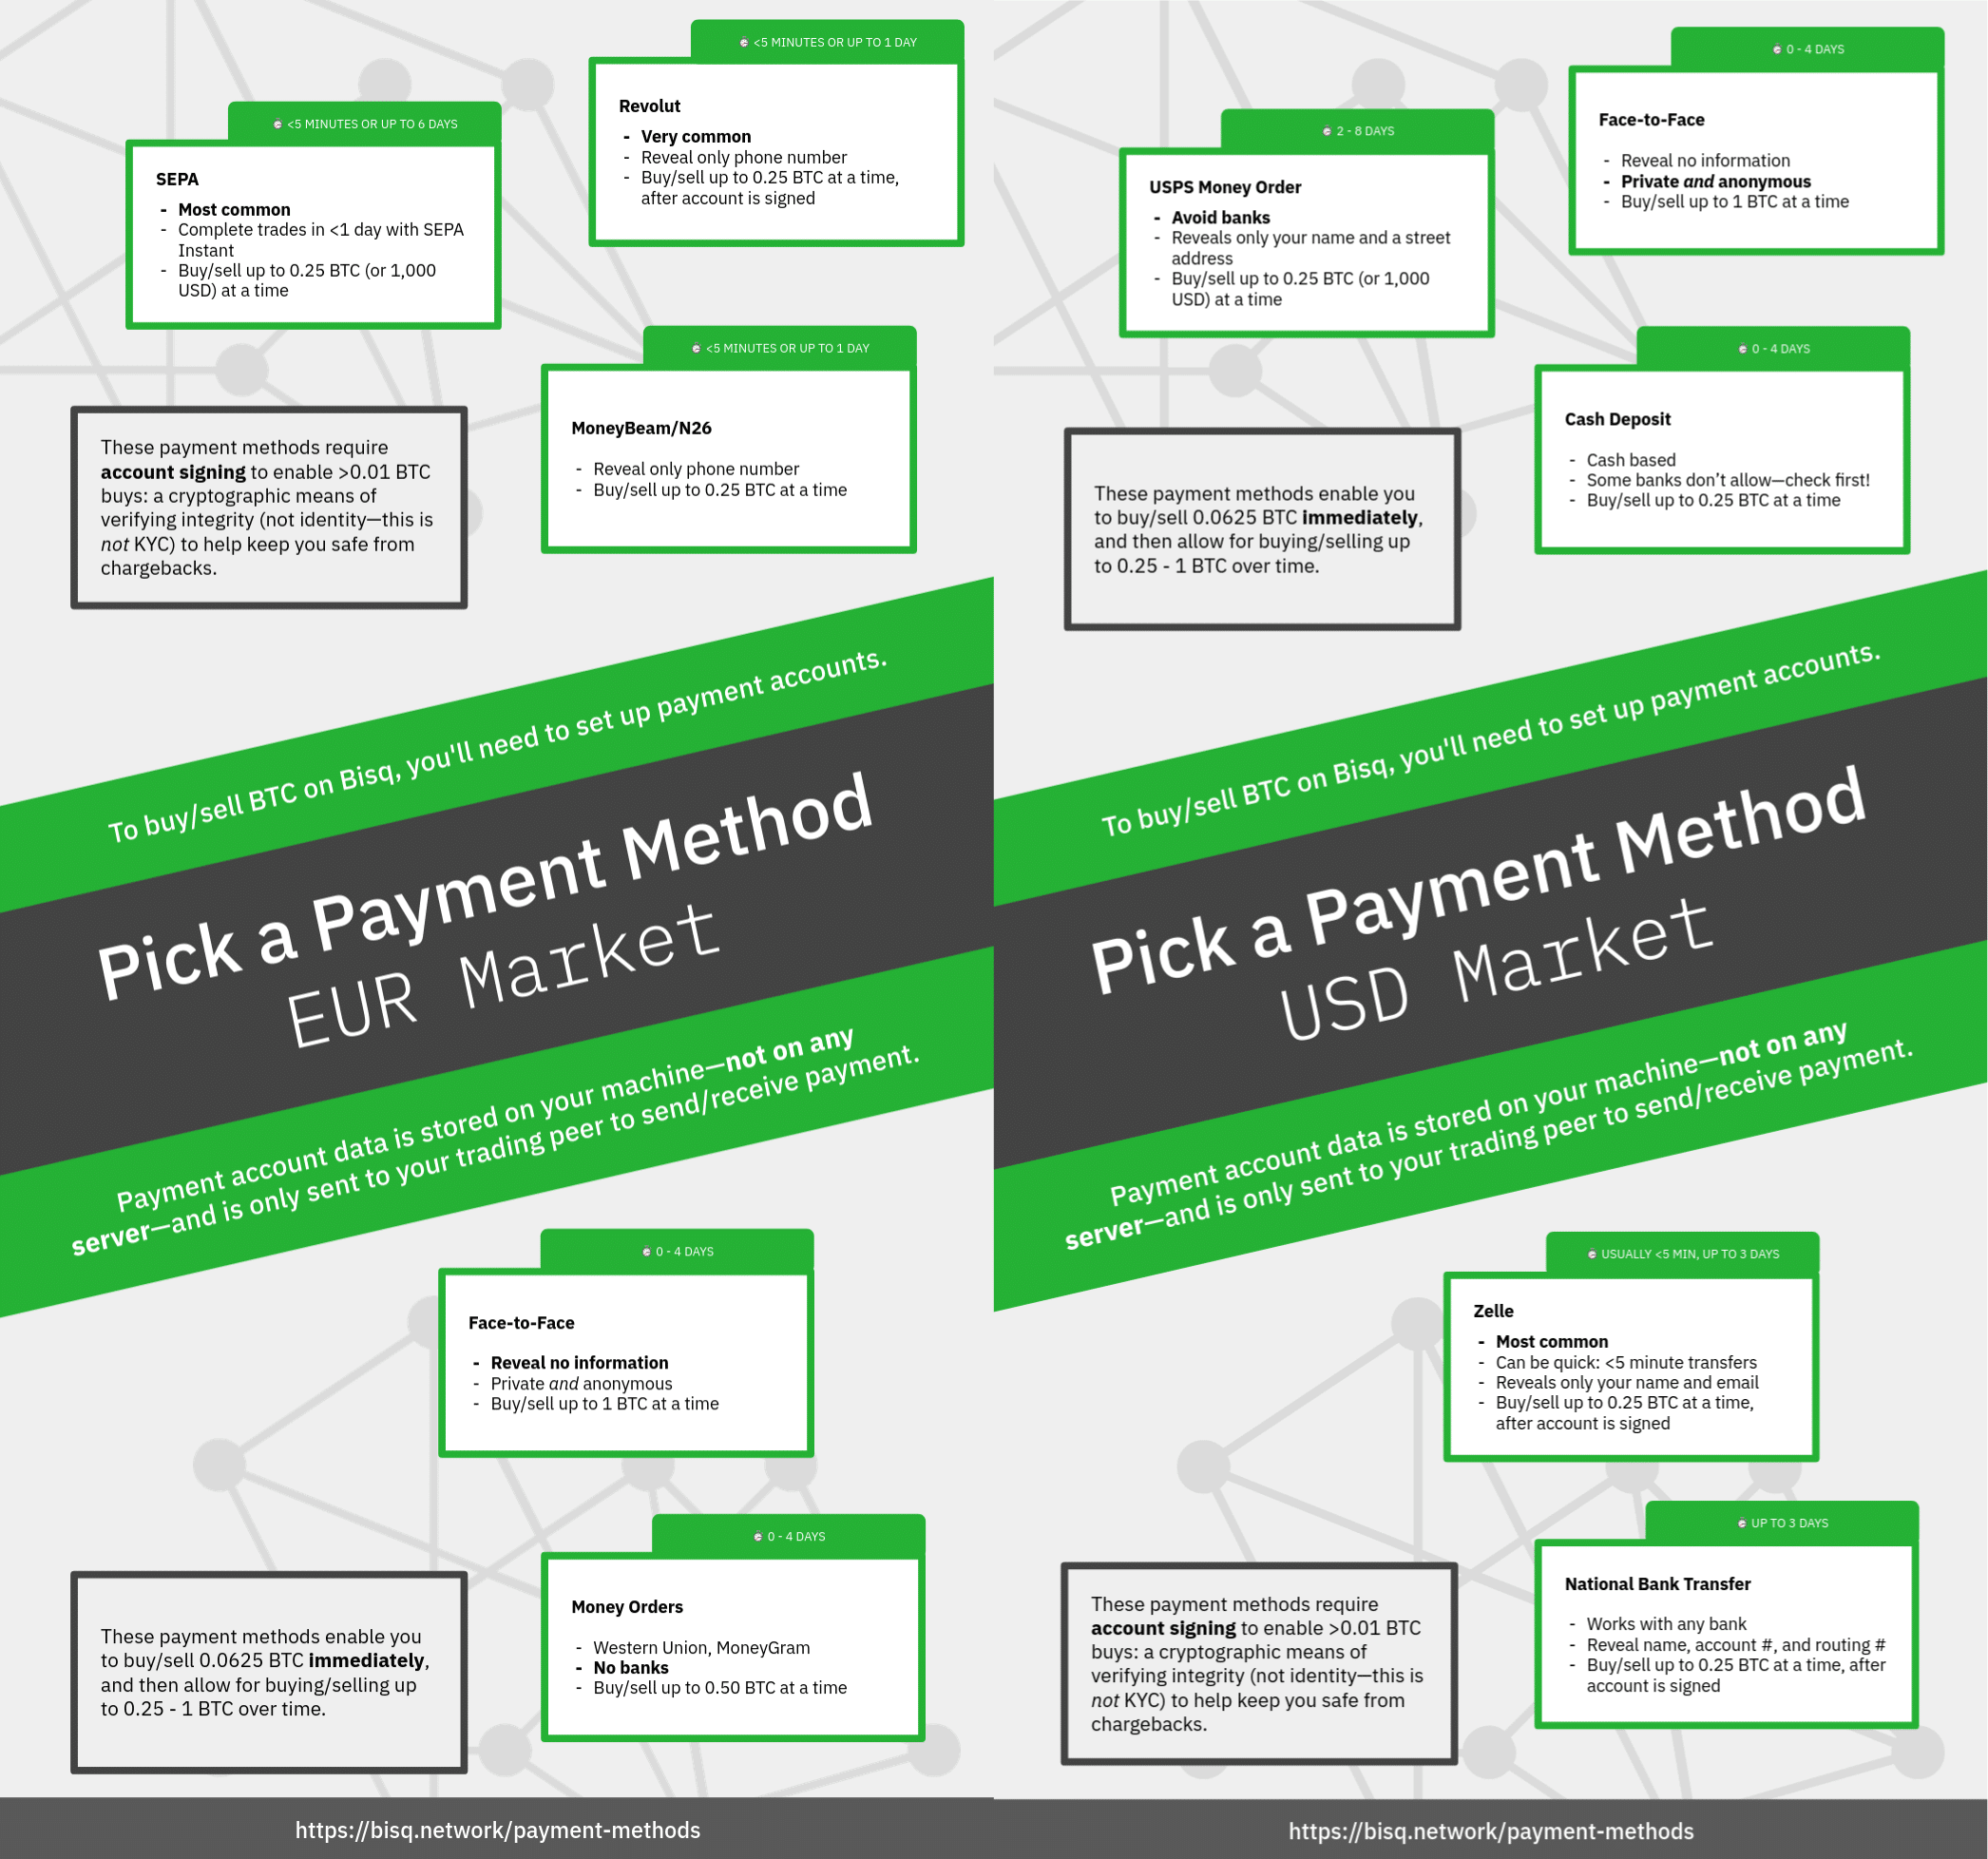 Bisq Payment Methods explained